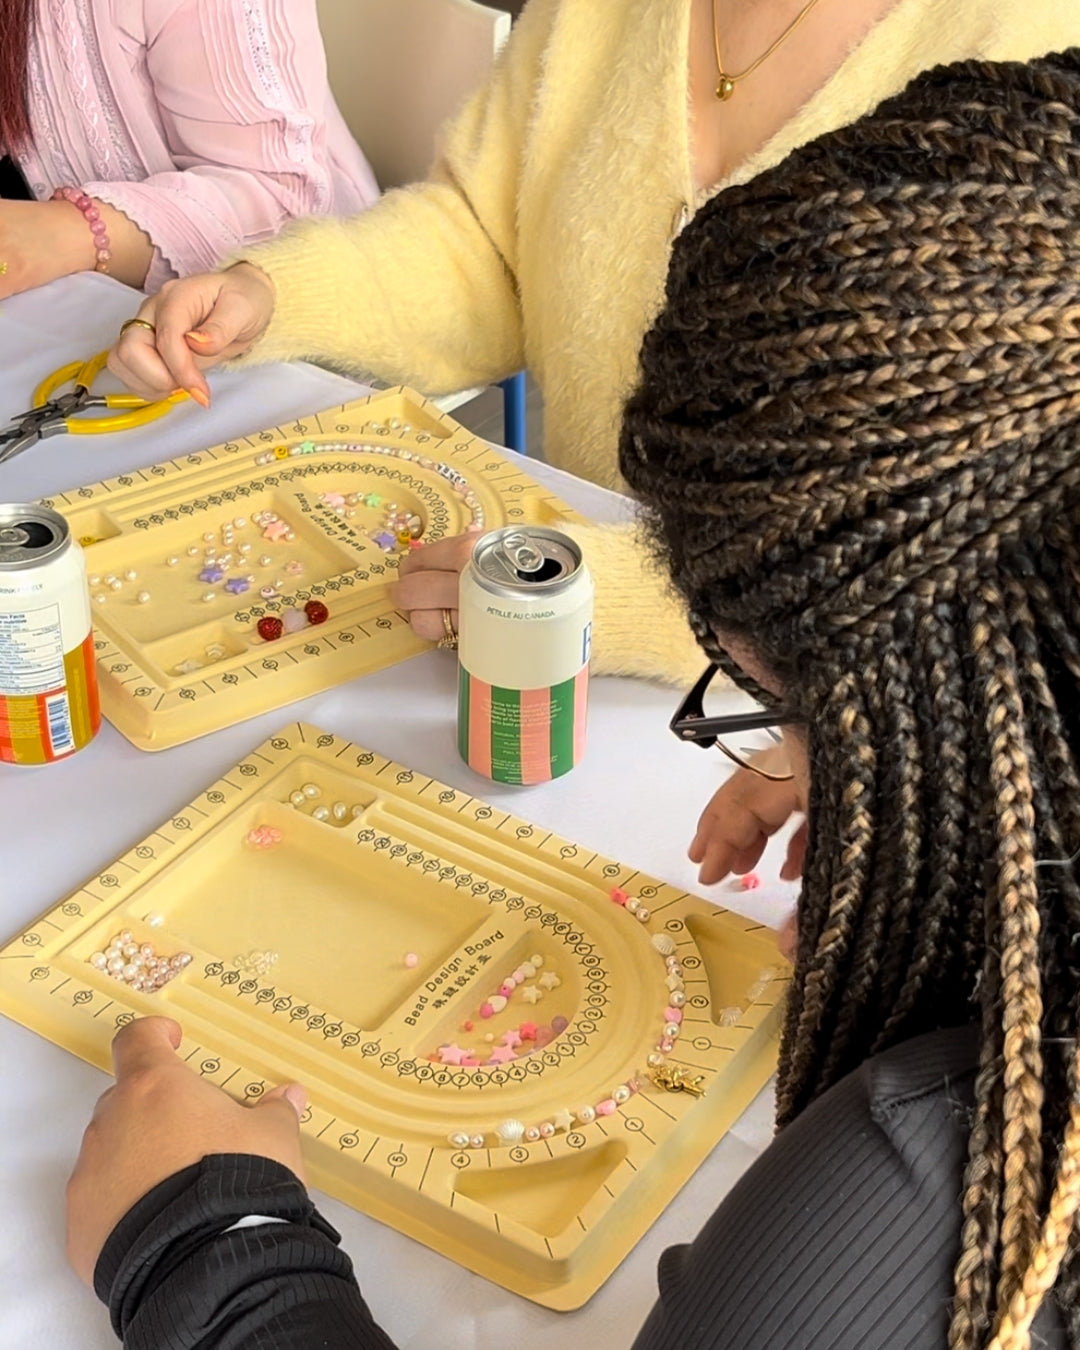 The Buttercup Beading Workshop